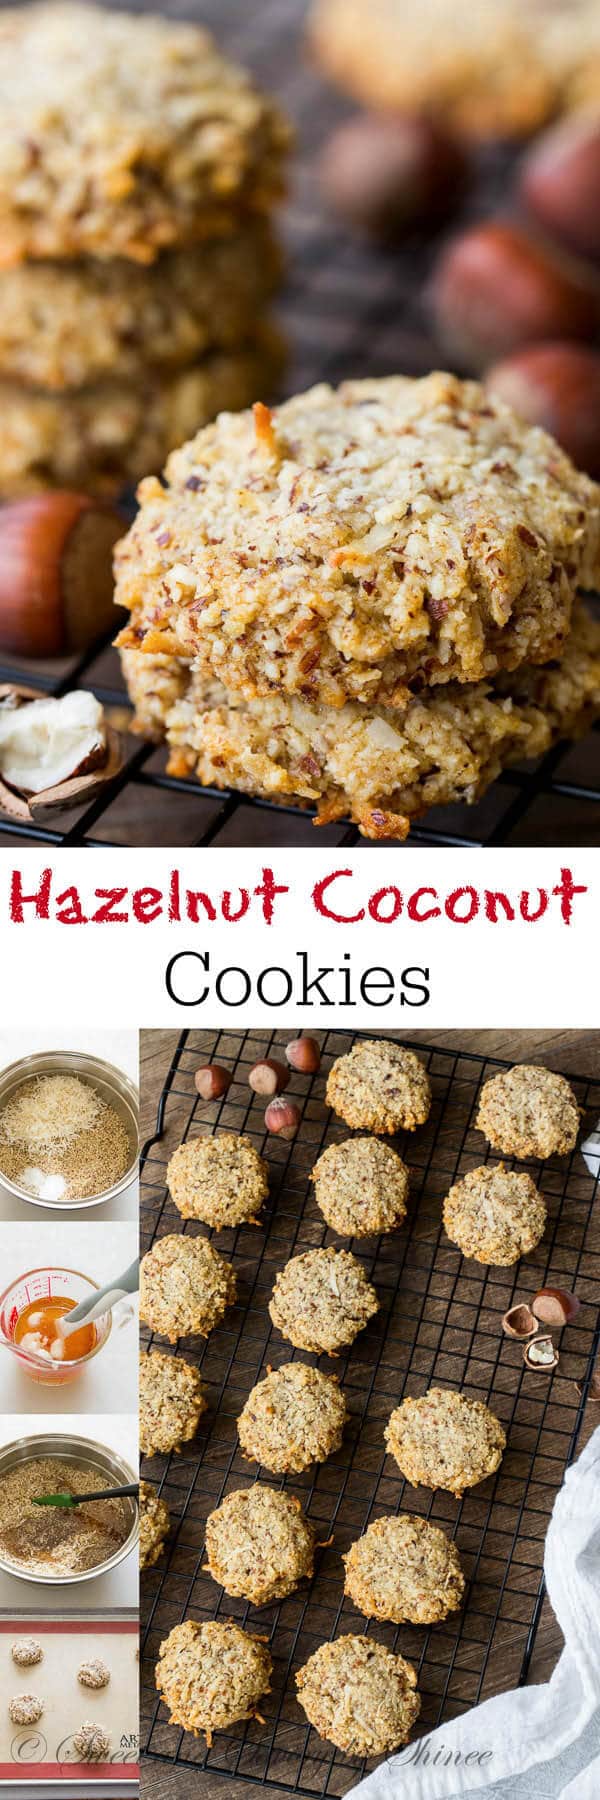 These chewy, wholesome hazelnut coconut cookies are made with only good-for-you-ingredients. No processed sugar, no butter, no flour. And they actually taste amazing!!